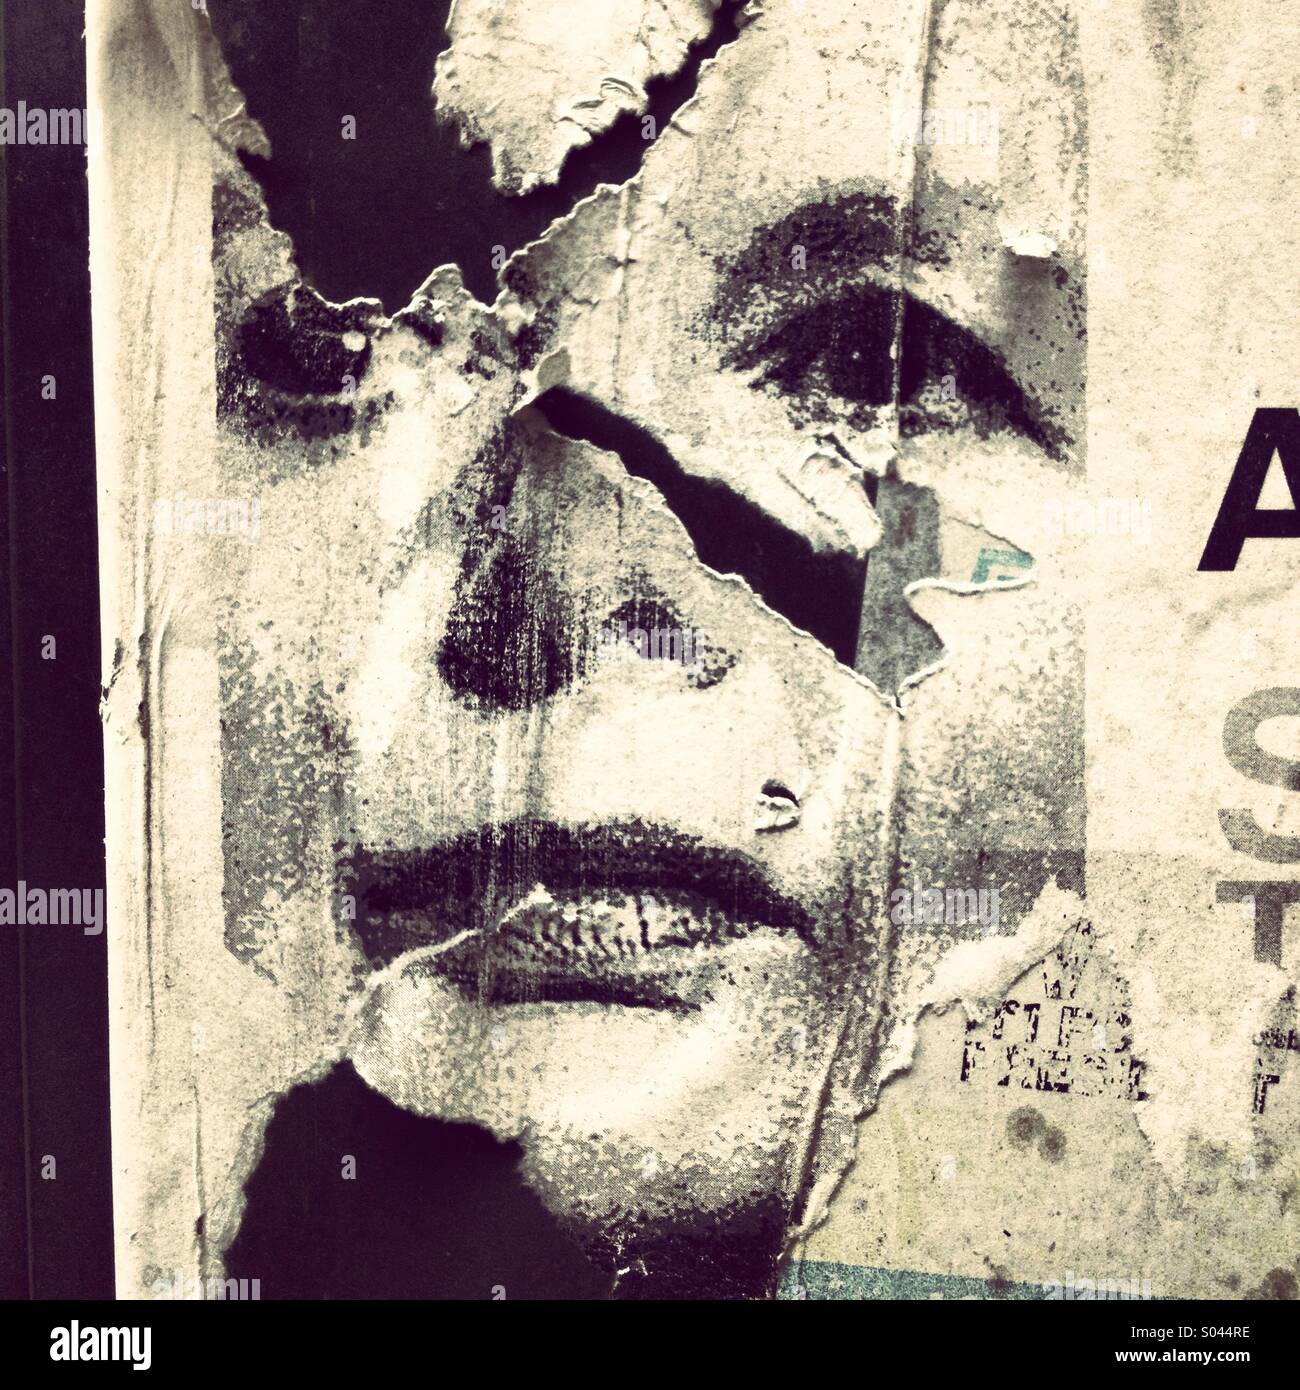 Torn poster depicting the face of British politician Margaret Thatcher. Stock Photo